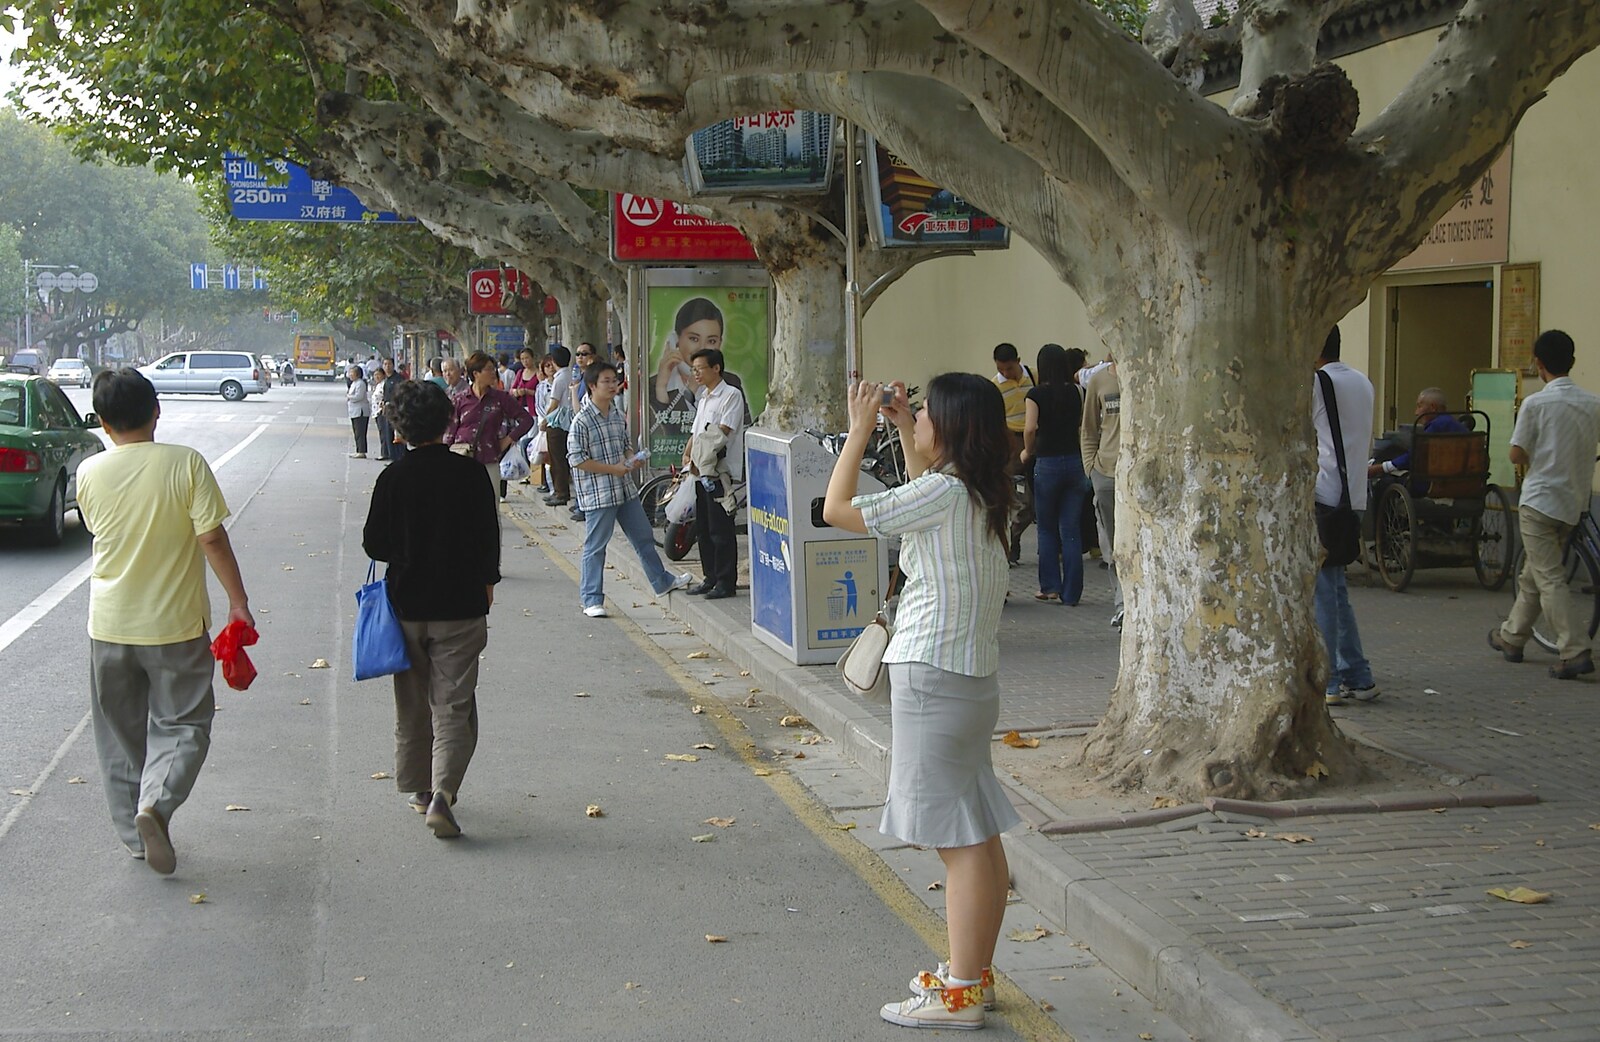 Someone takes a photo from A Few Days in Nanjing, Jiangsu Province, China - 7th October 2006